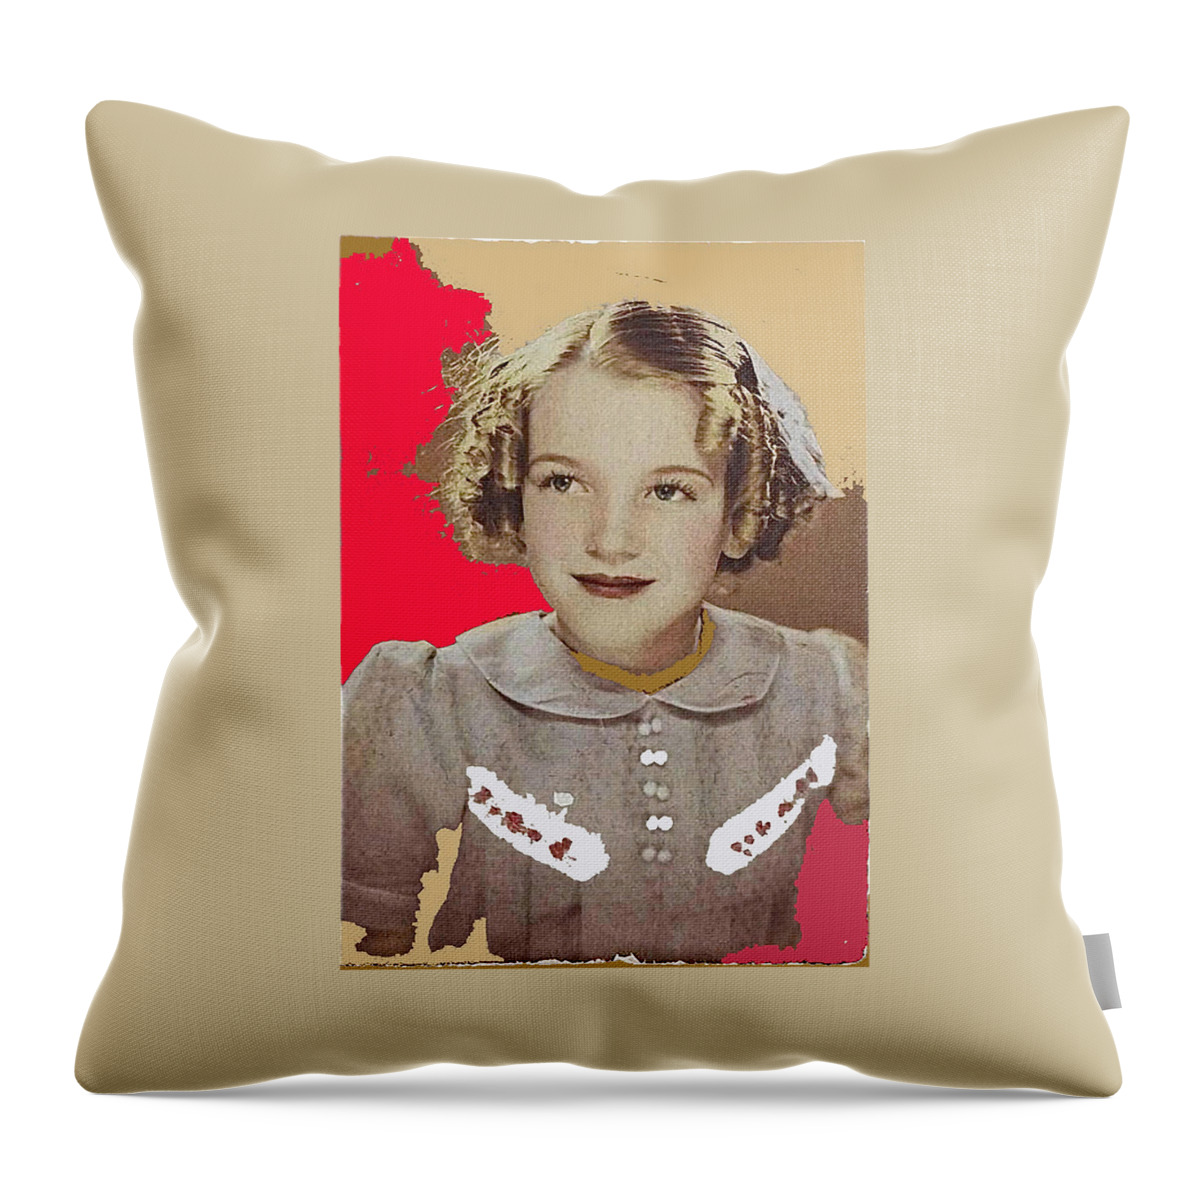 Marilyn Monroe As A Child Color Added Throw Pillow featuring the photograph Marilyn Monroe as a child c. 1936-2013 by David Lee Guss